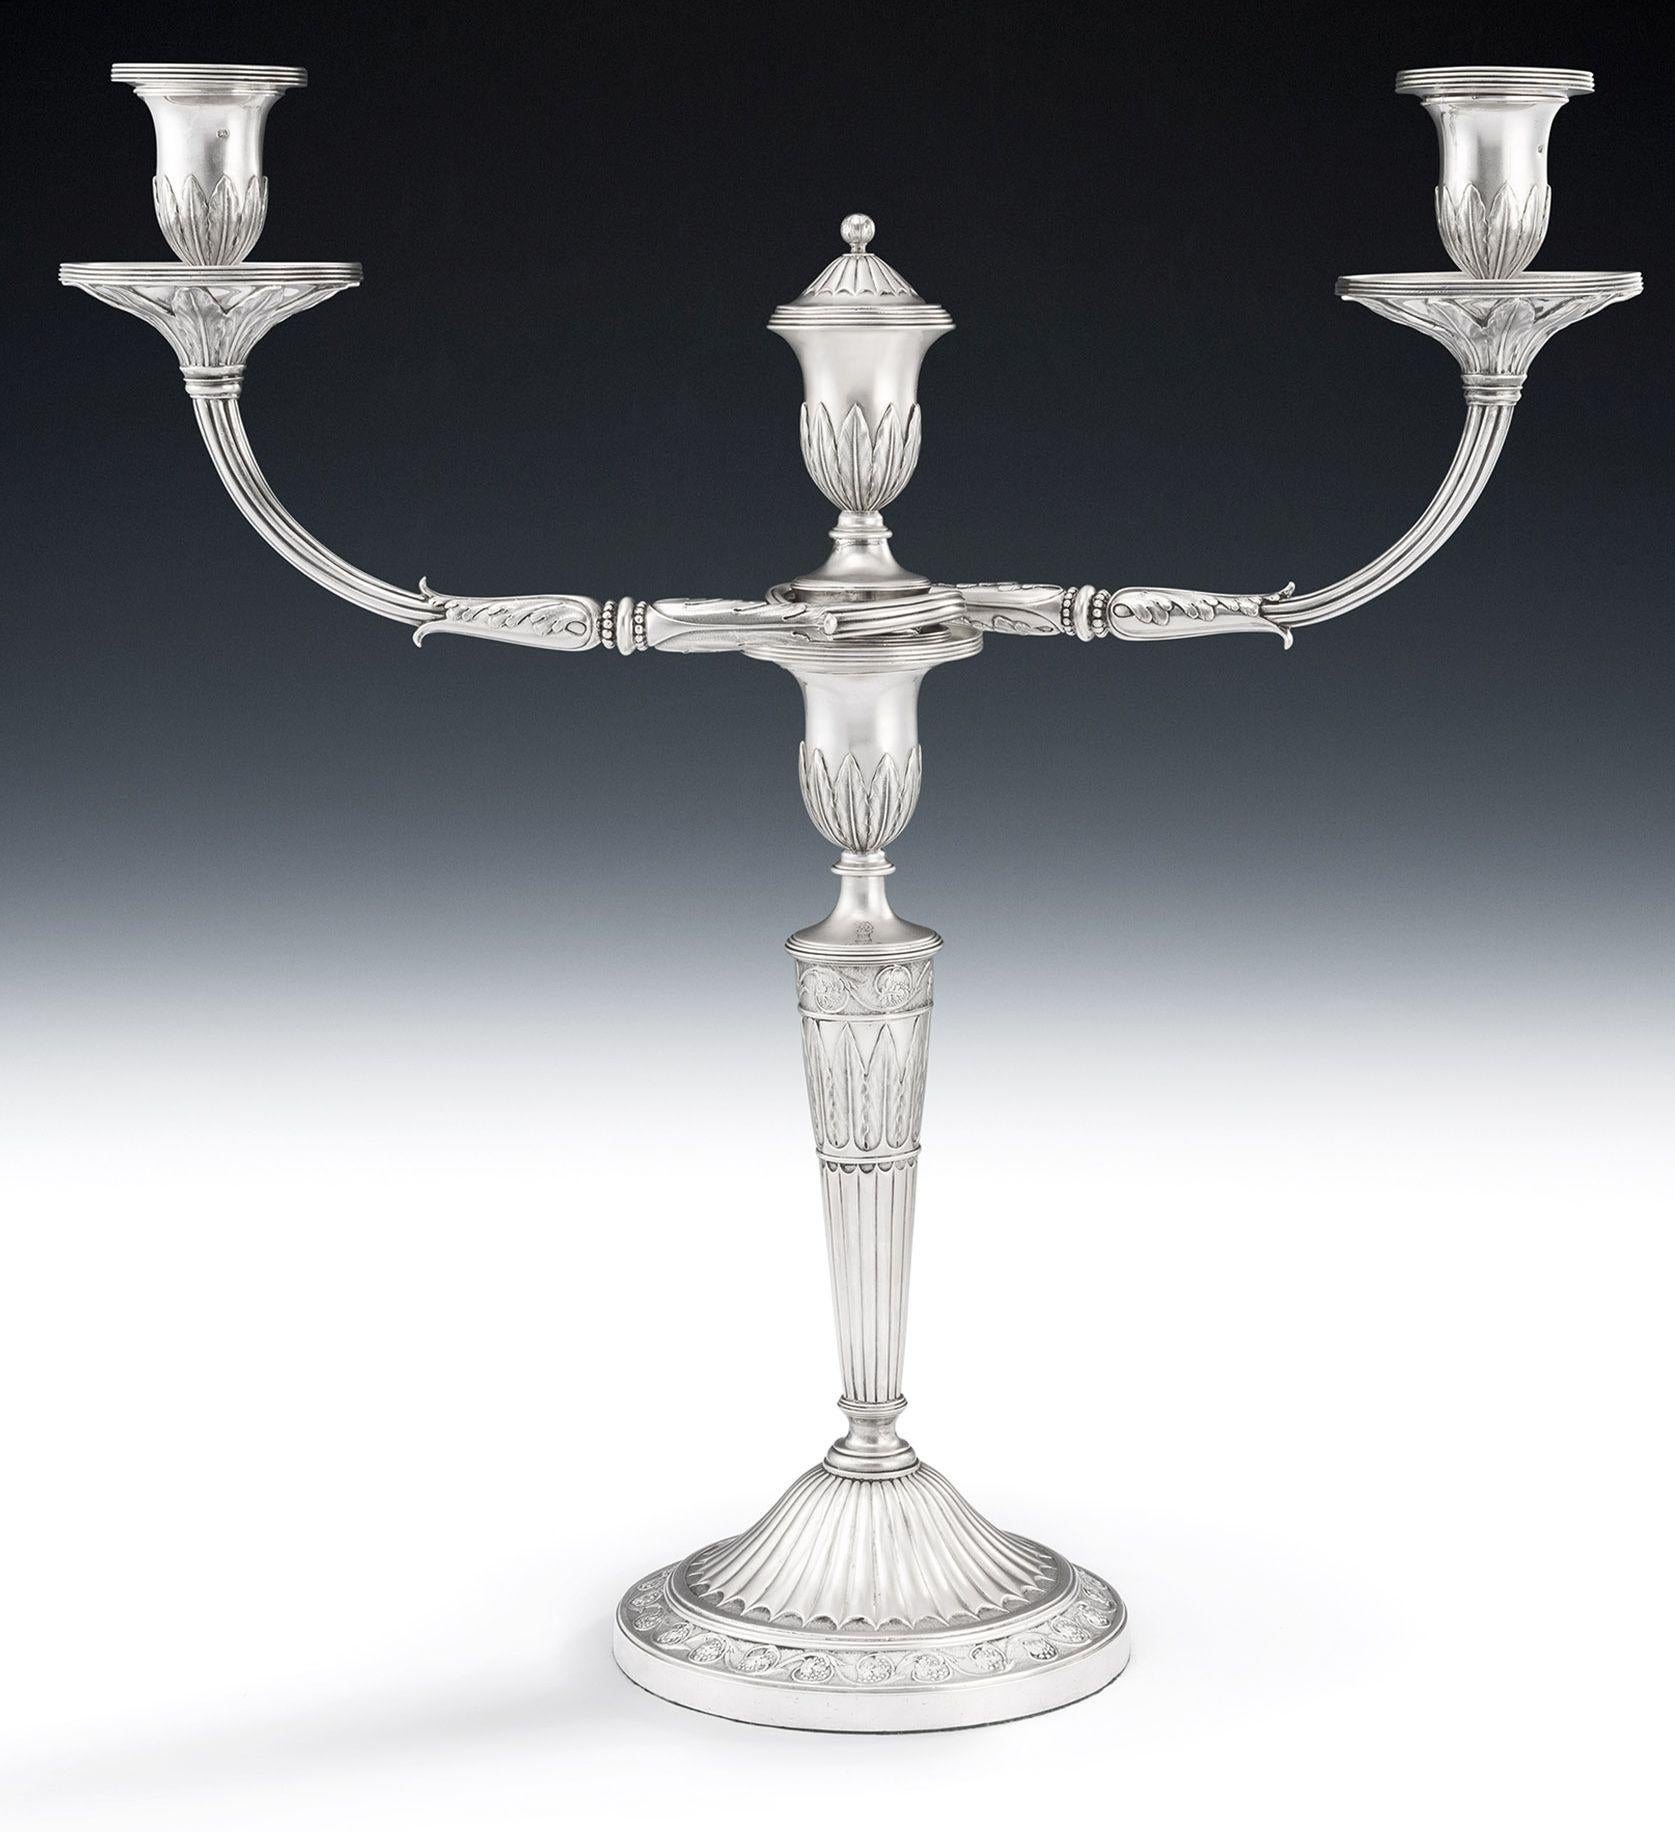 An important & exceptional George III Candelabrum made in London in 1793 by Edward Fernell.

This very fine piece is modelled in the unusual Neo Classical tradition.  The base is circular in form and is decorated with a domed bat wing fluted